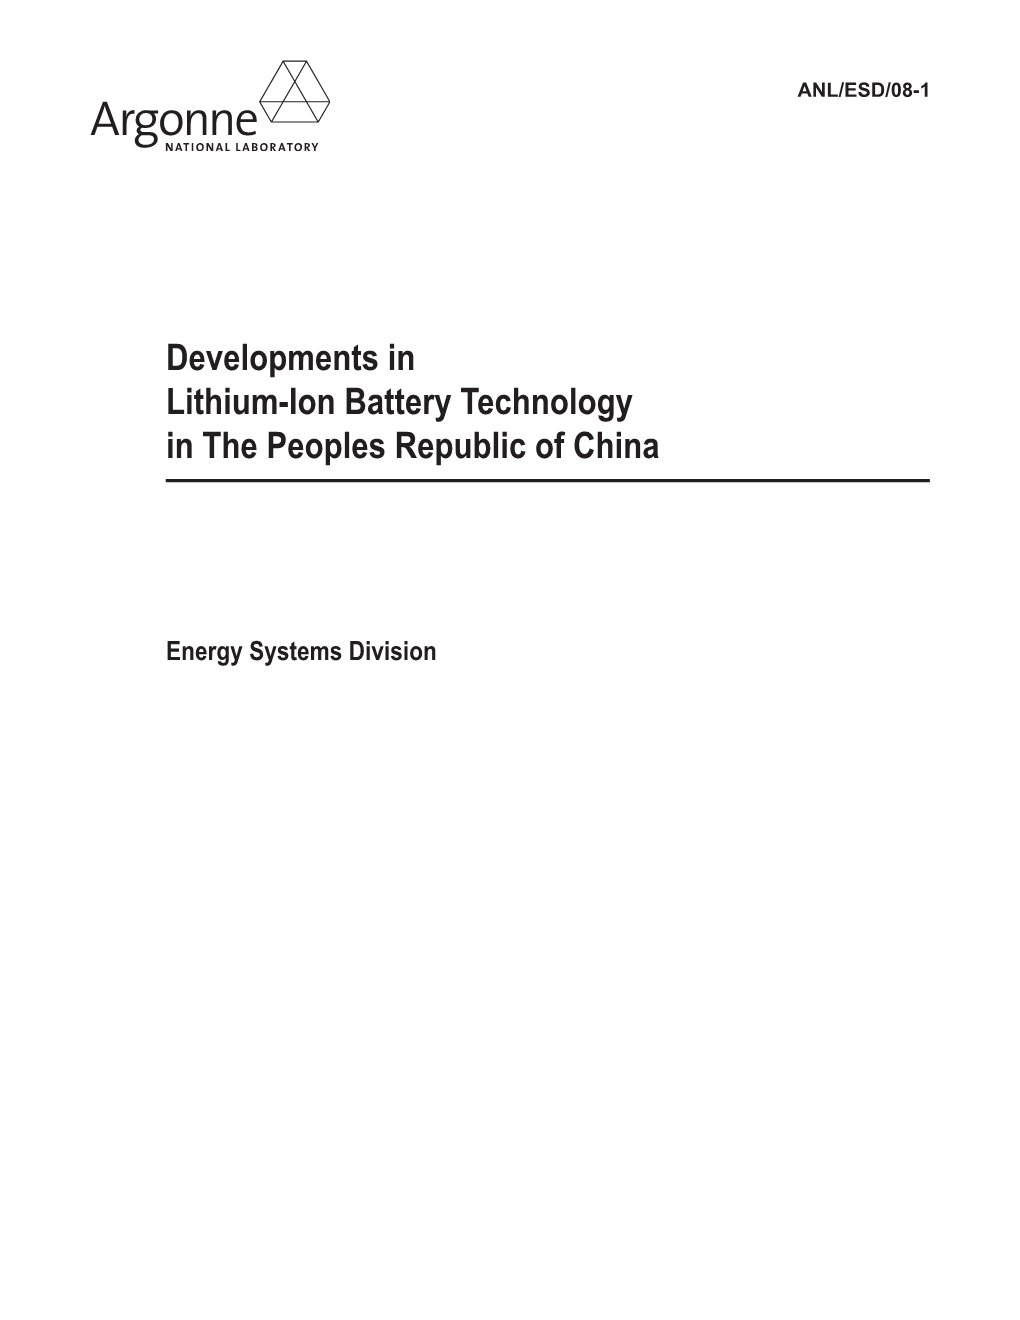 Developments in Lithium-Ion Battery Technology in the Peoples Republic of China